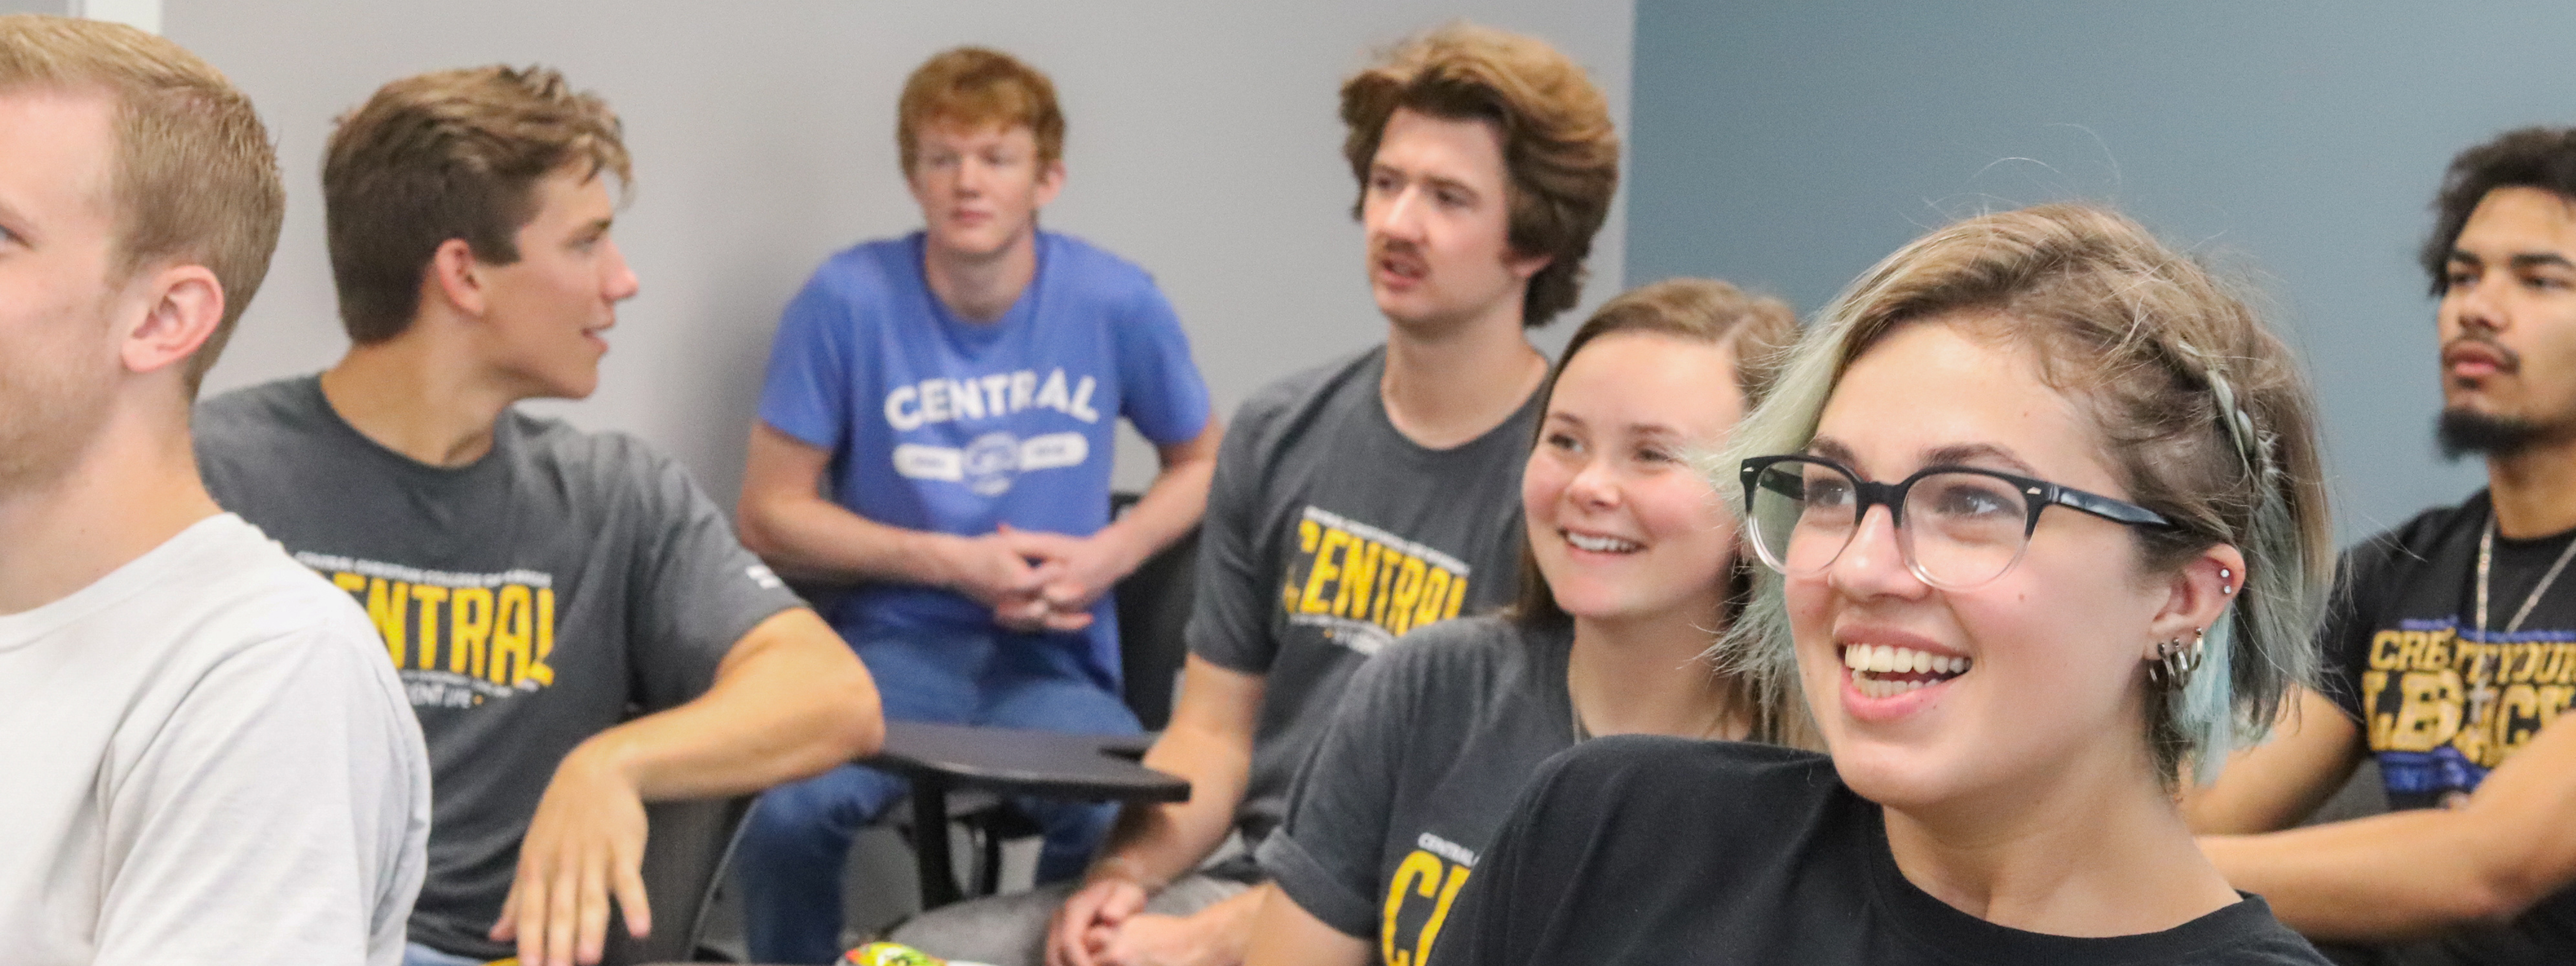 Mathematics Photo Header: Central students sitting in a classroom smiling and talking to each other